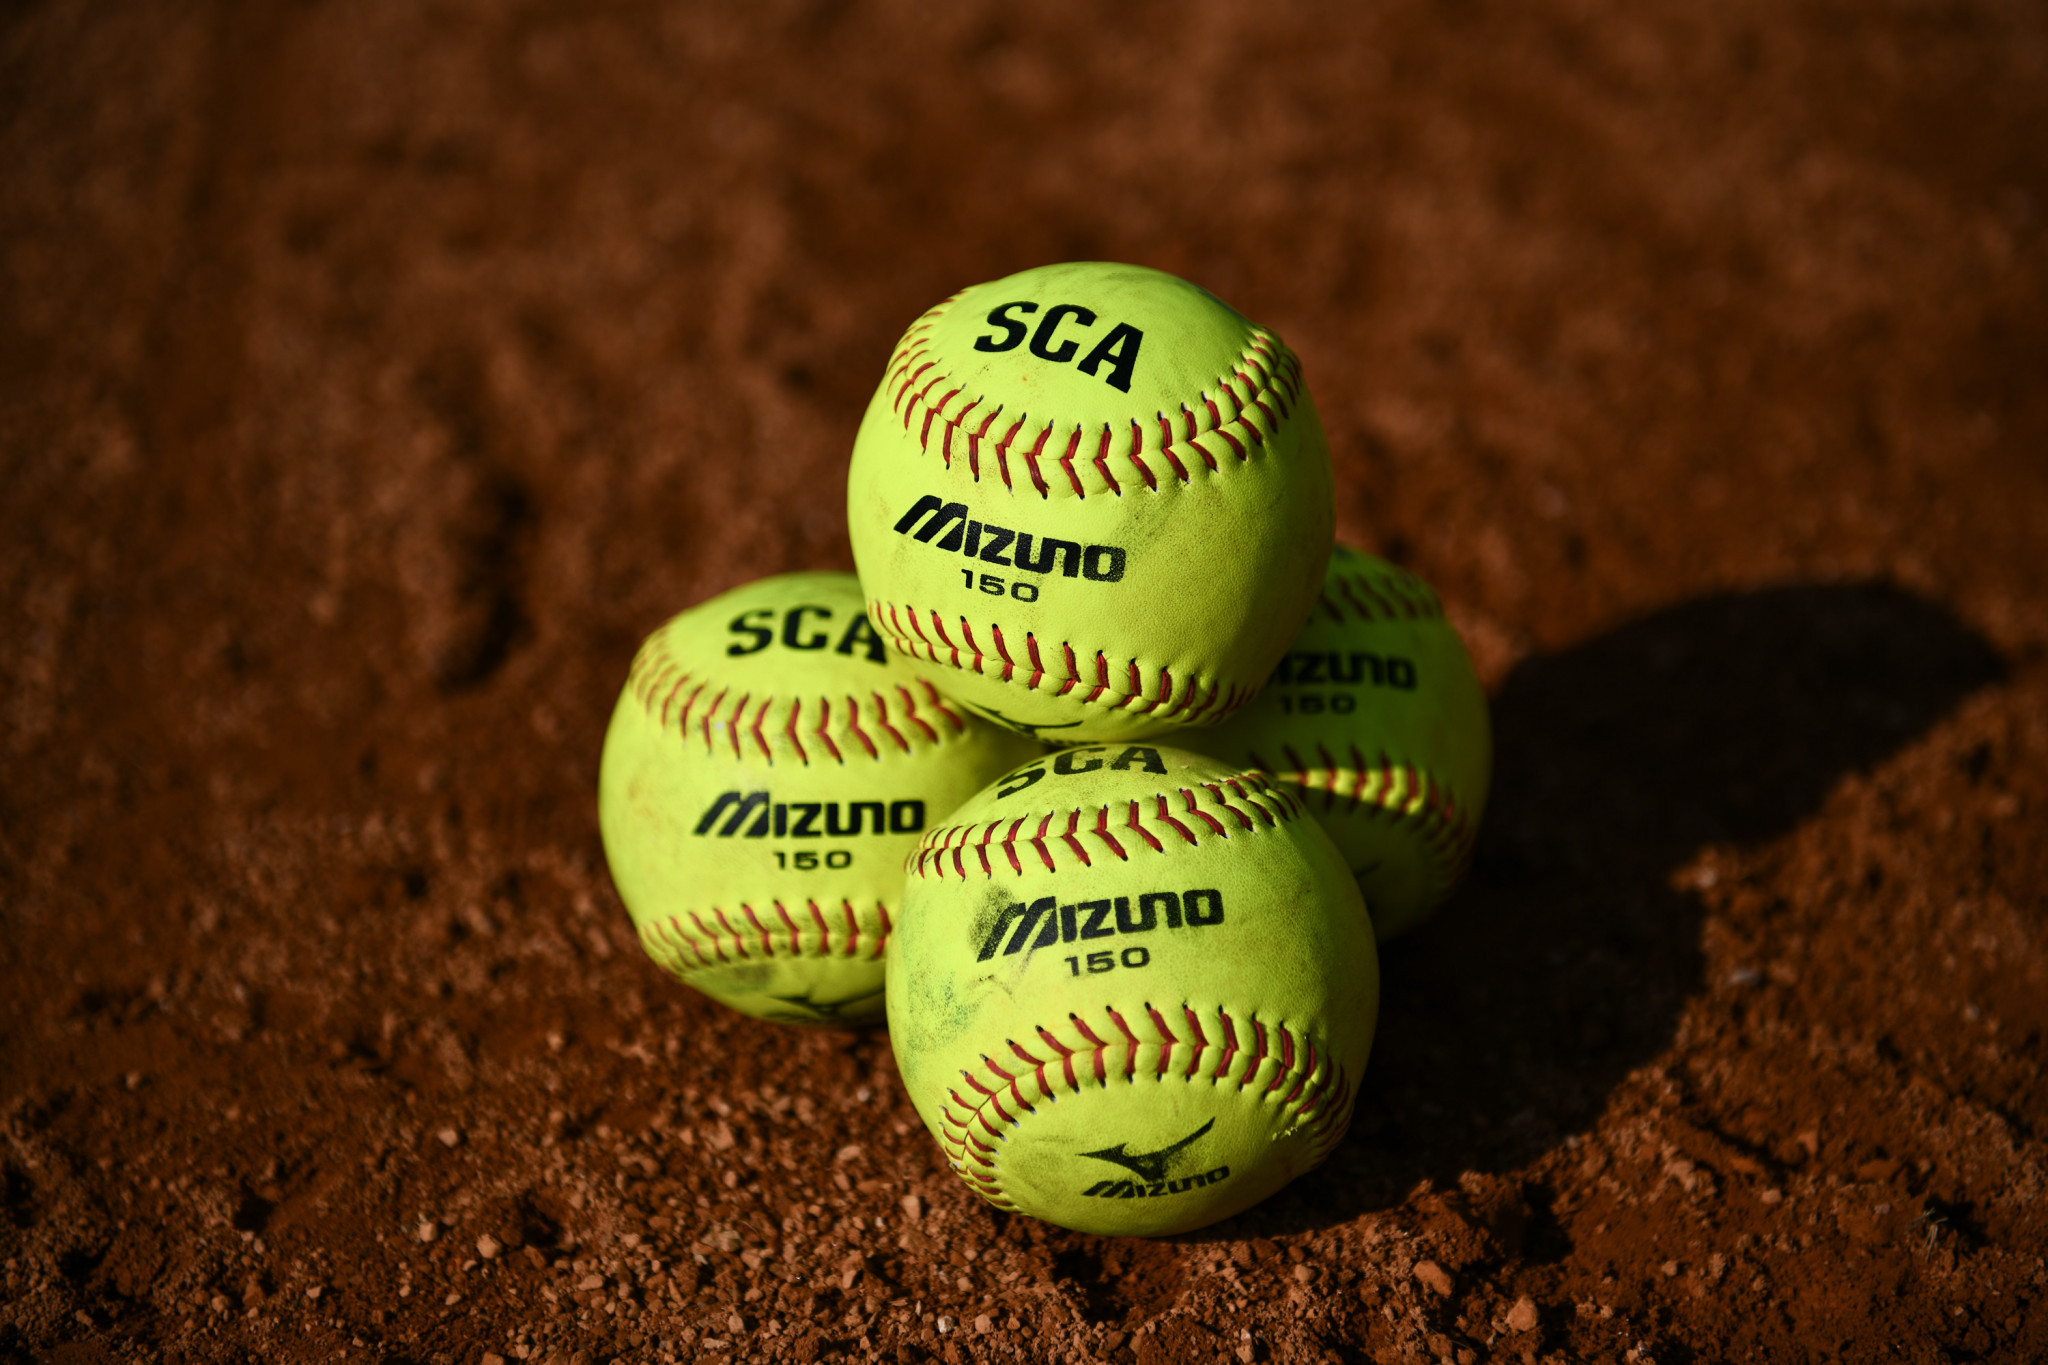 Under-18 Women’s Softball World Cup moved to 2021